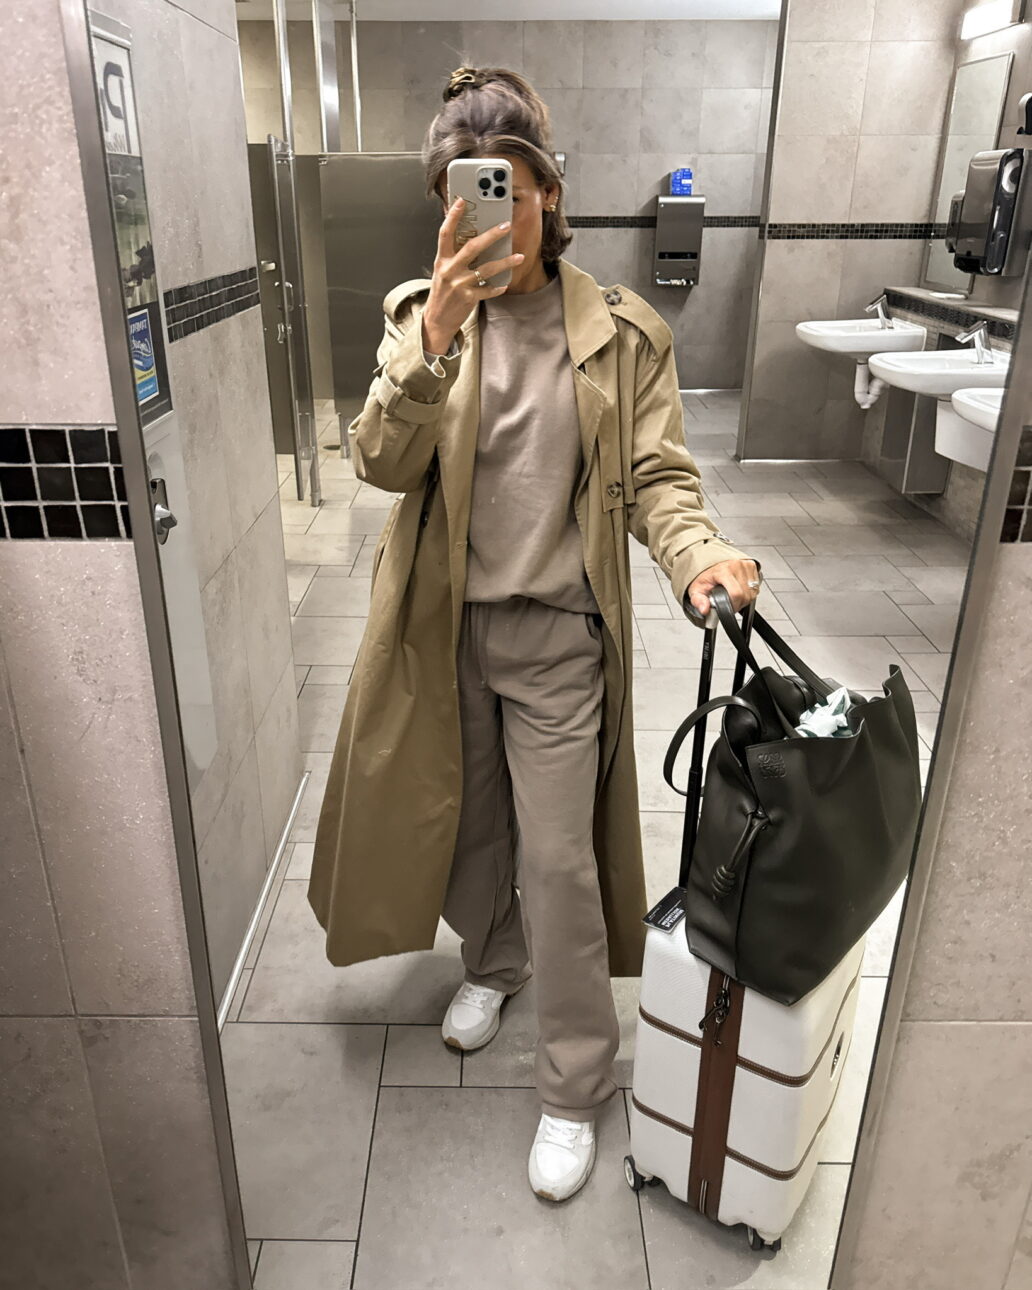 trench coat outfit for traveling - sweatsuit set and white sneakers